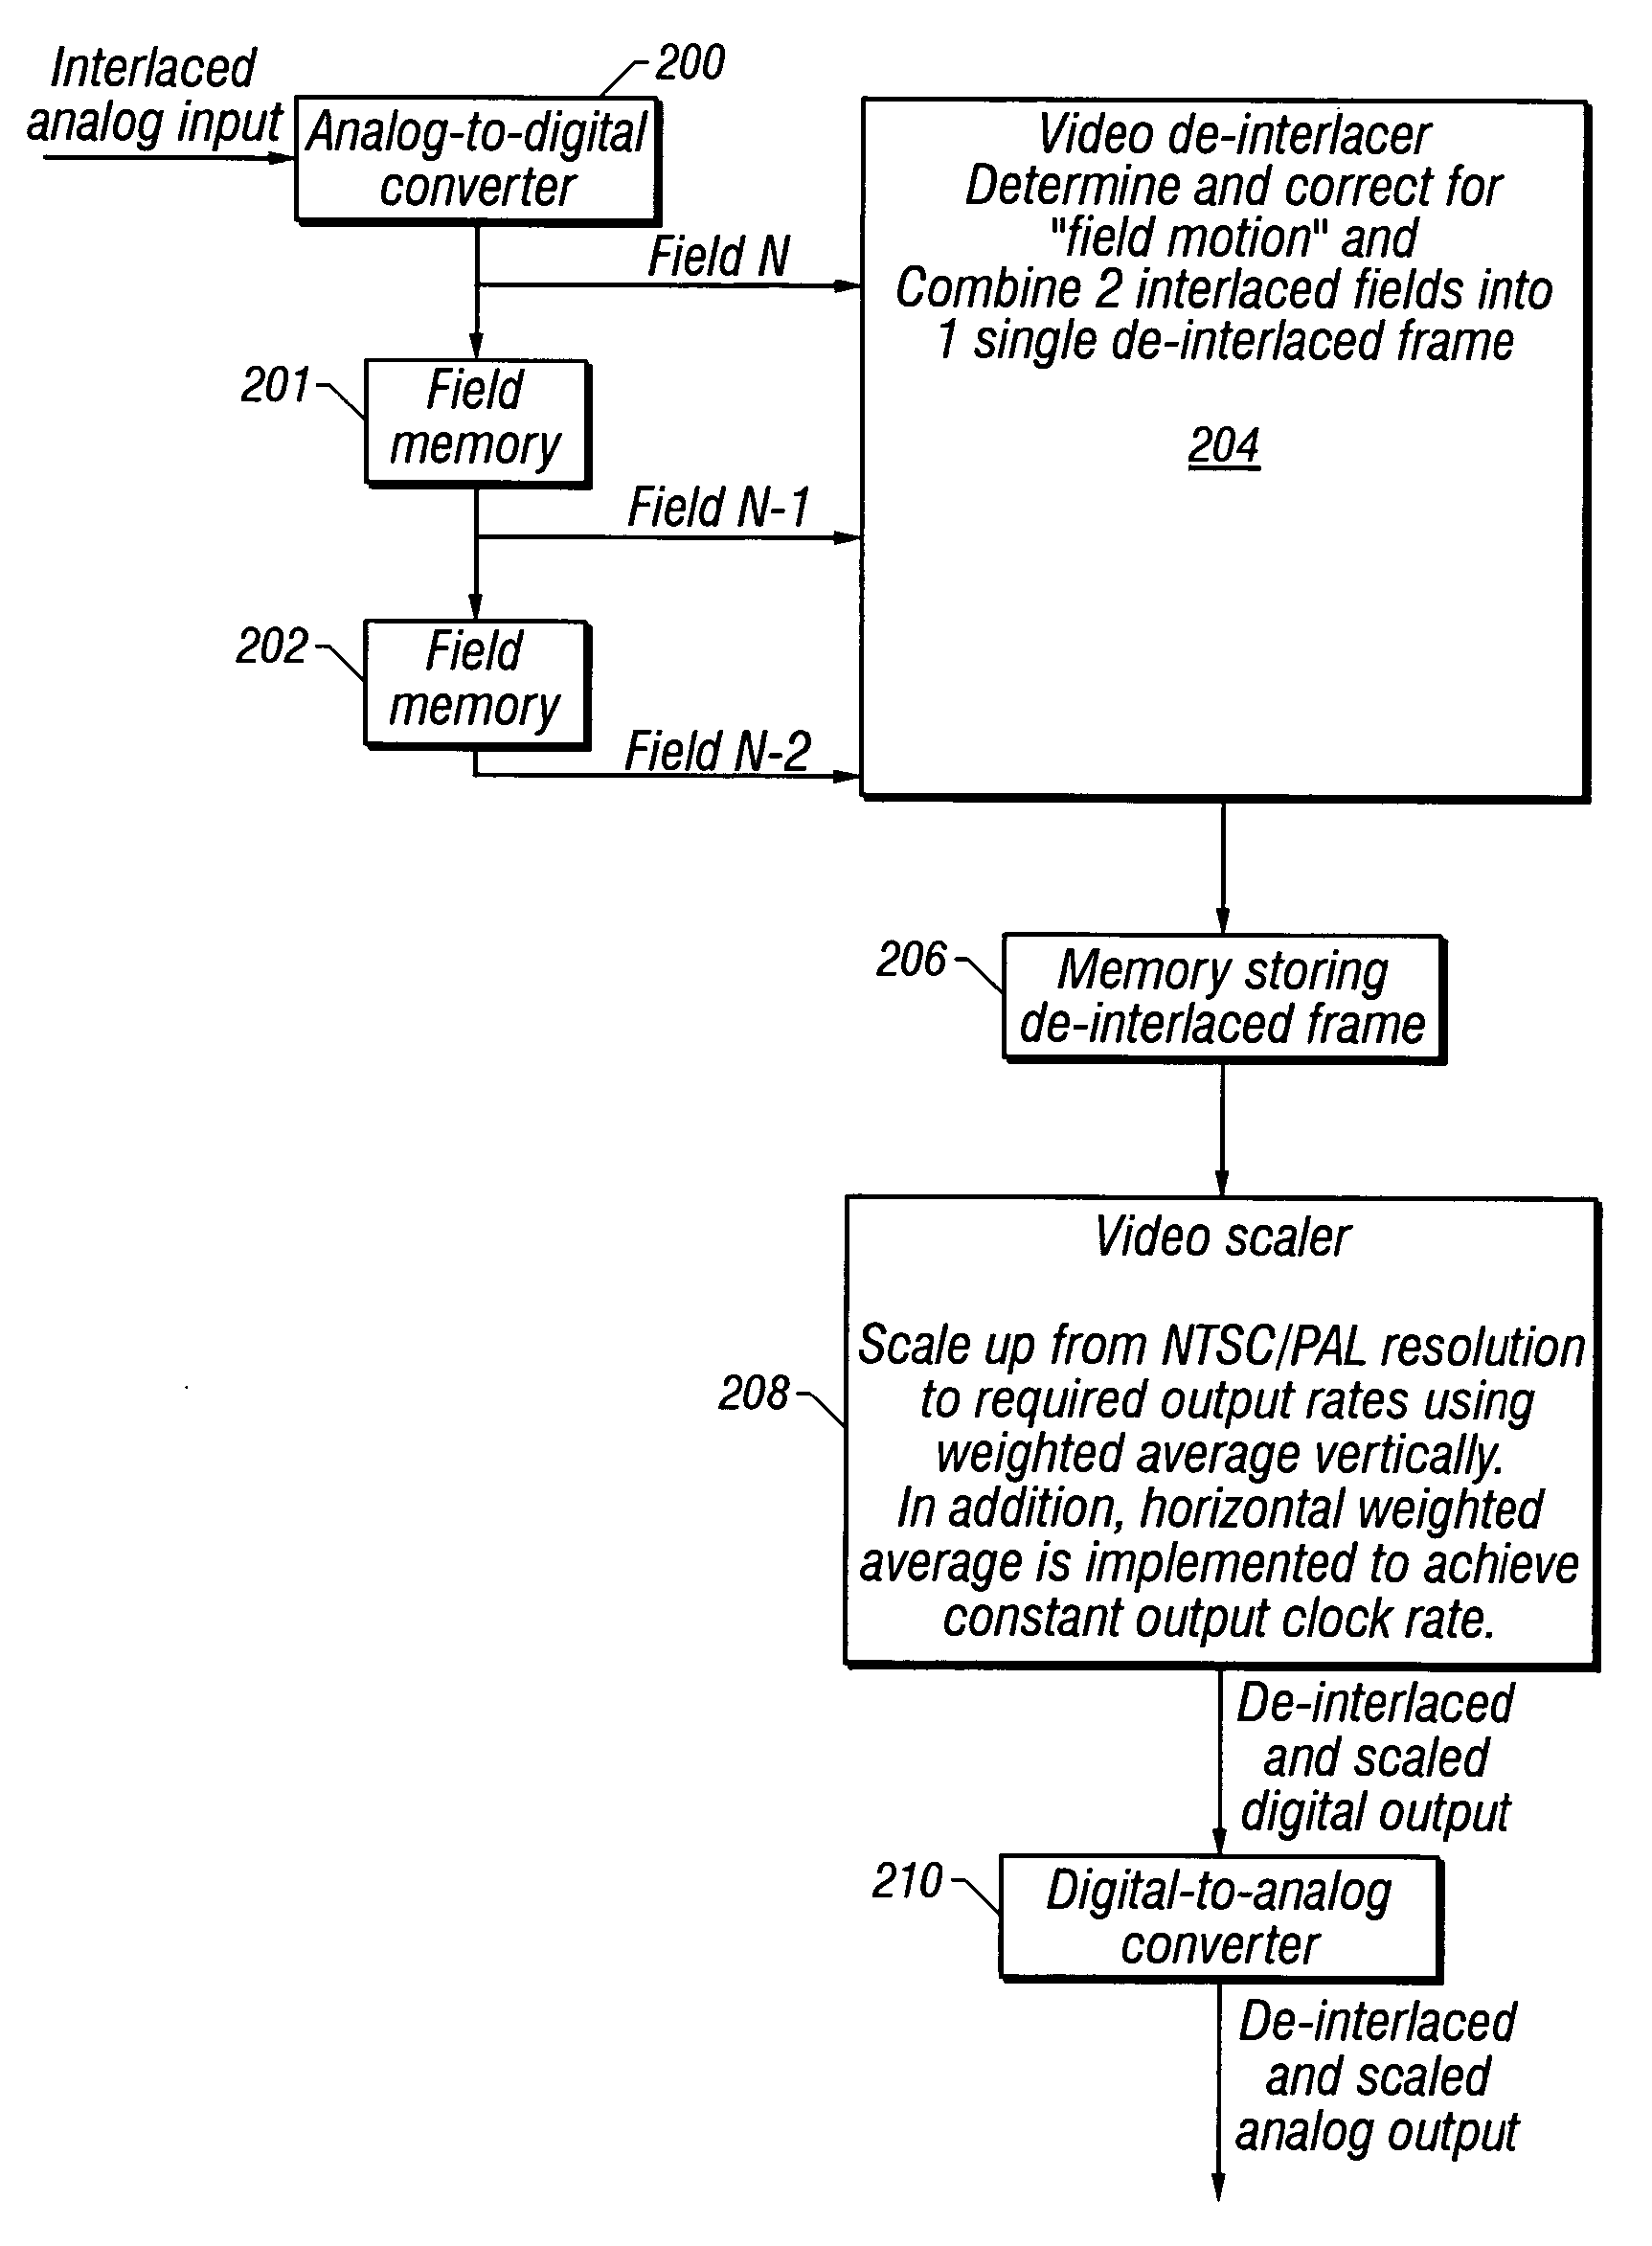 Method and apparatus for eliminating motion artifacts from video